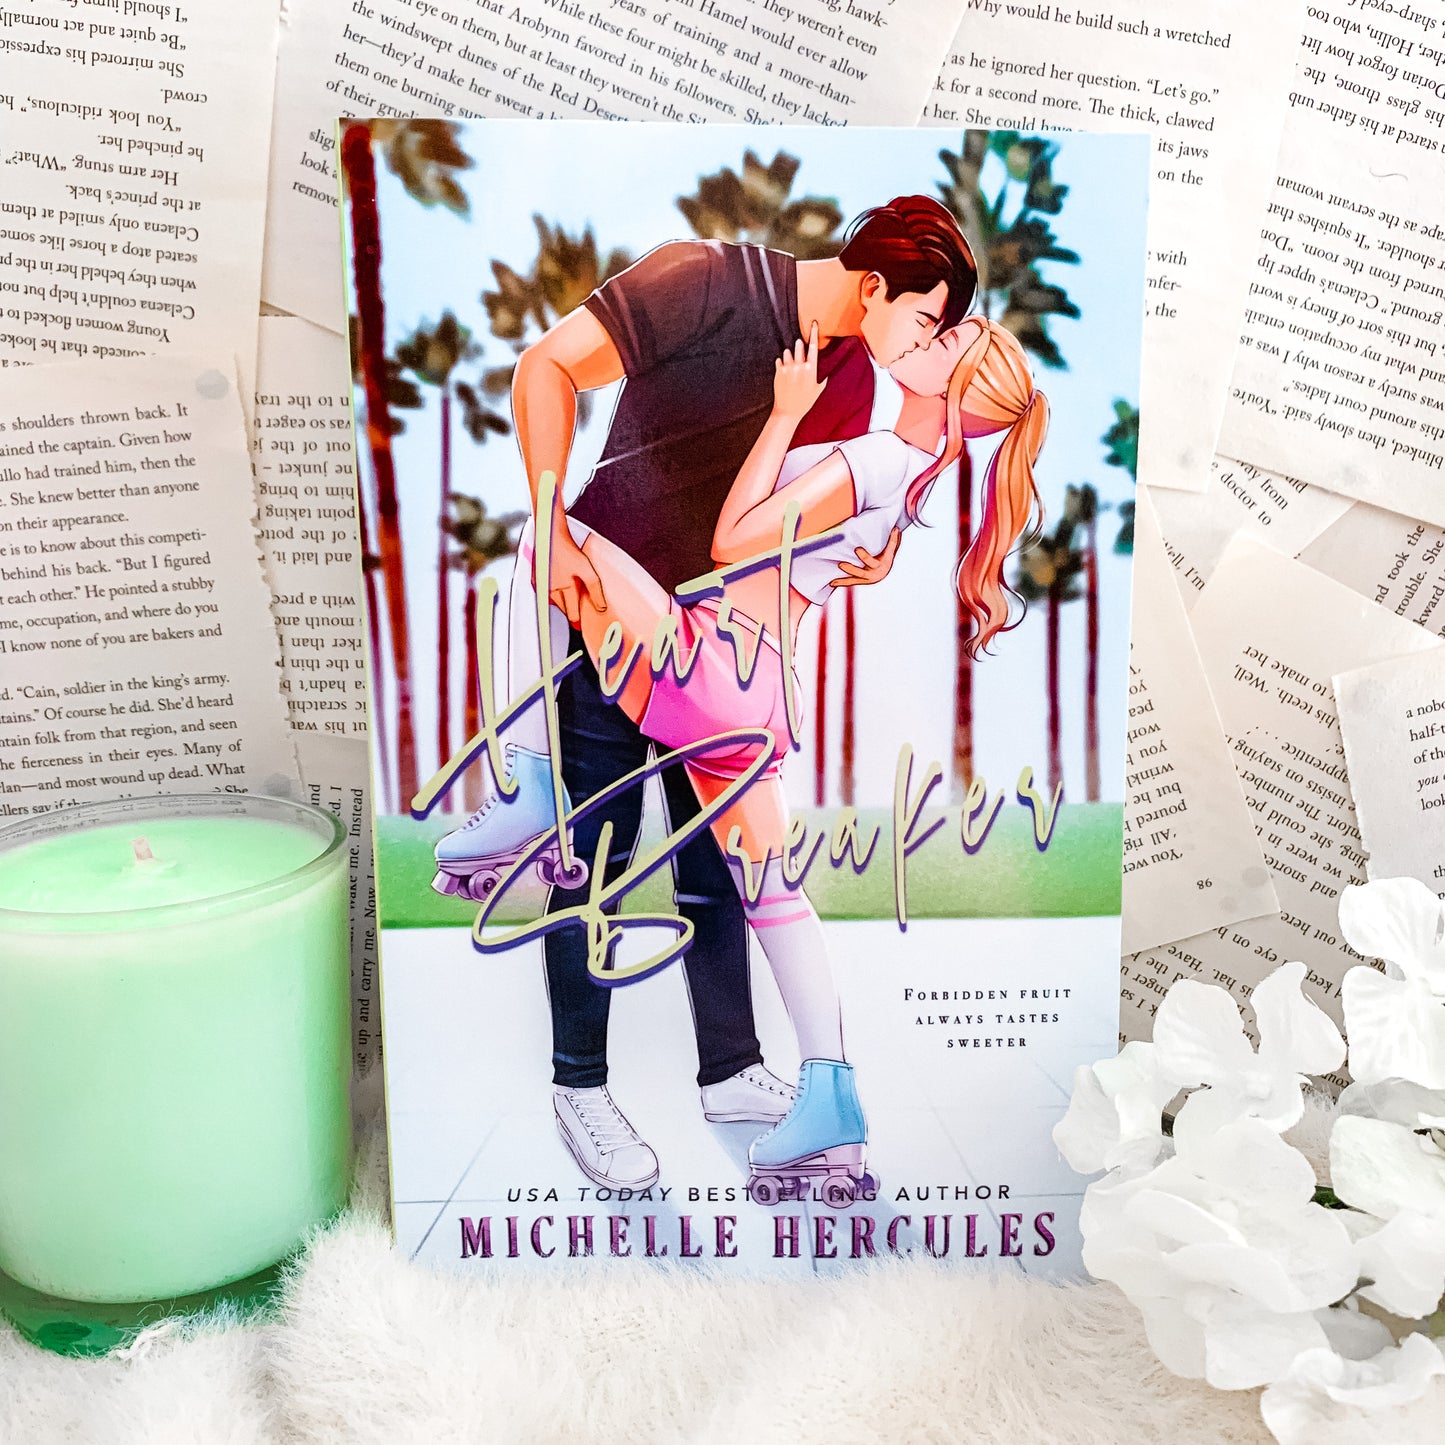 Rebels of Rushmore (Special Edition) by Michelle Hercules